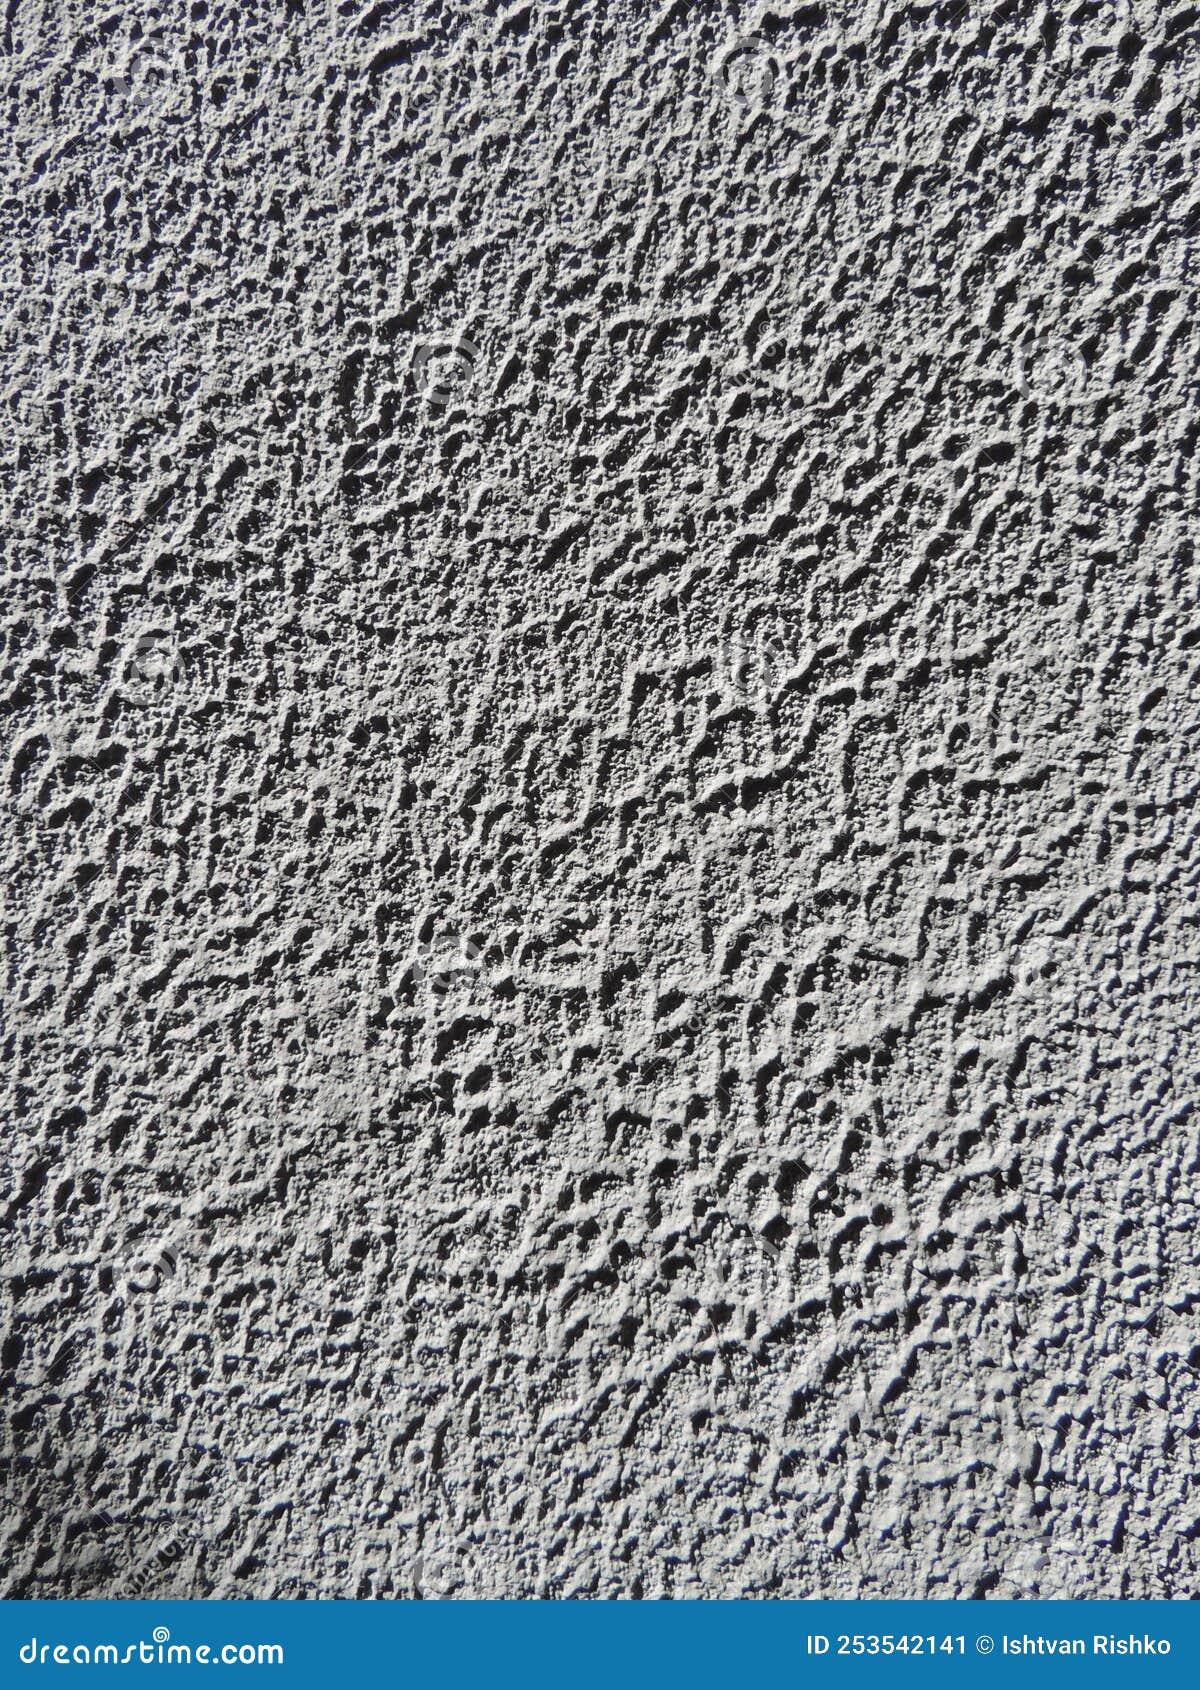 velfærd gear excitation Decorative Plaster in Tangential Lighting. Stock Image - Image of building,  tangential: 253542141